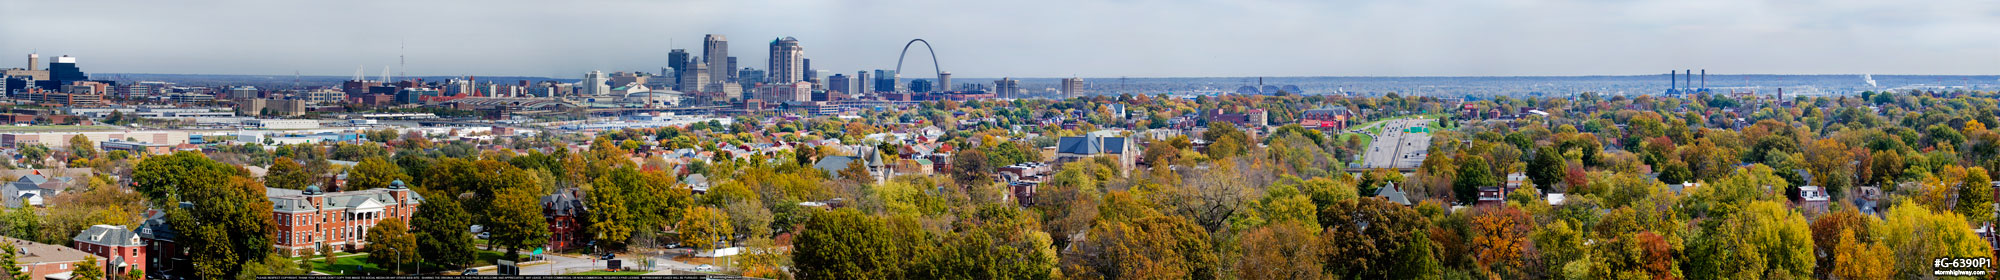 Panorama of the St. Louis skyline with fall colors